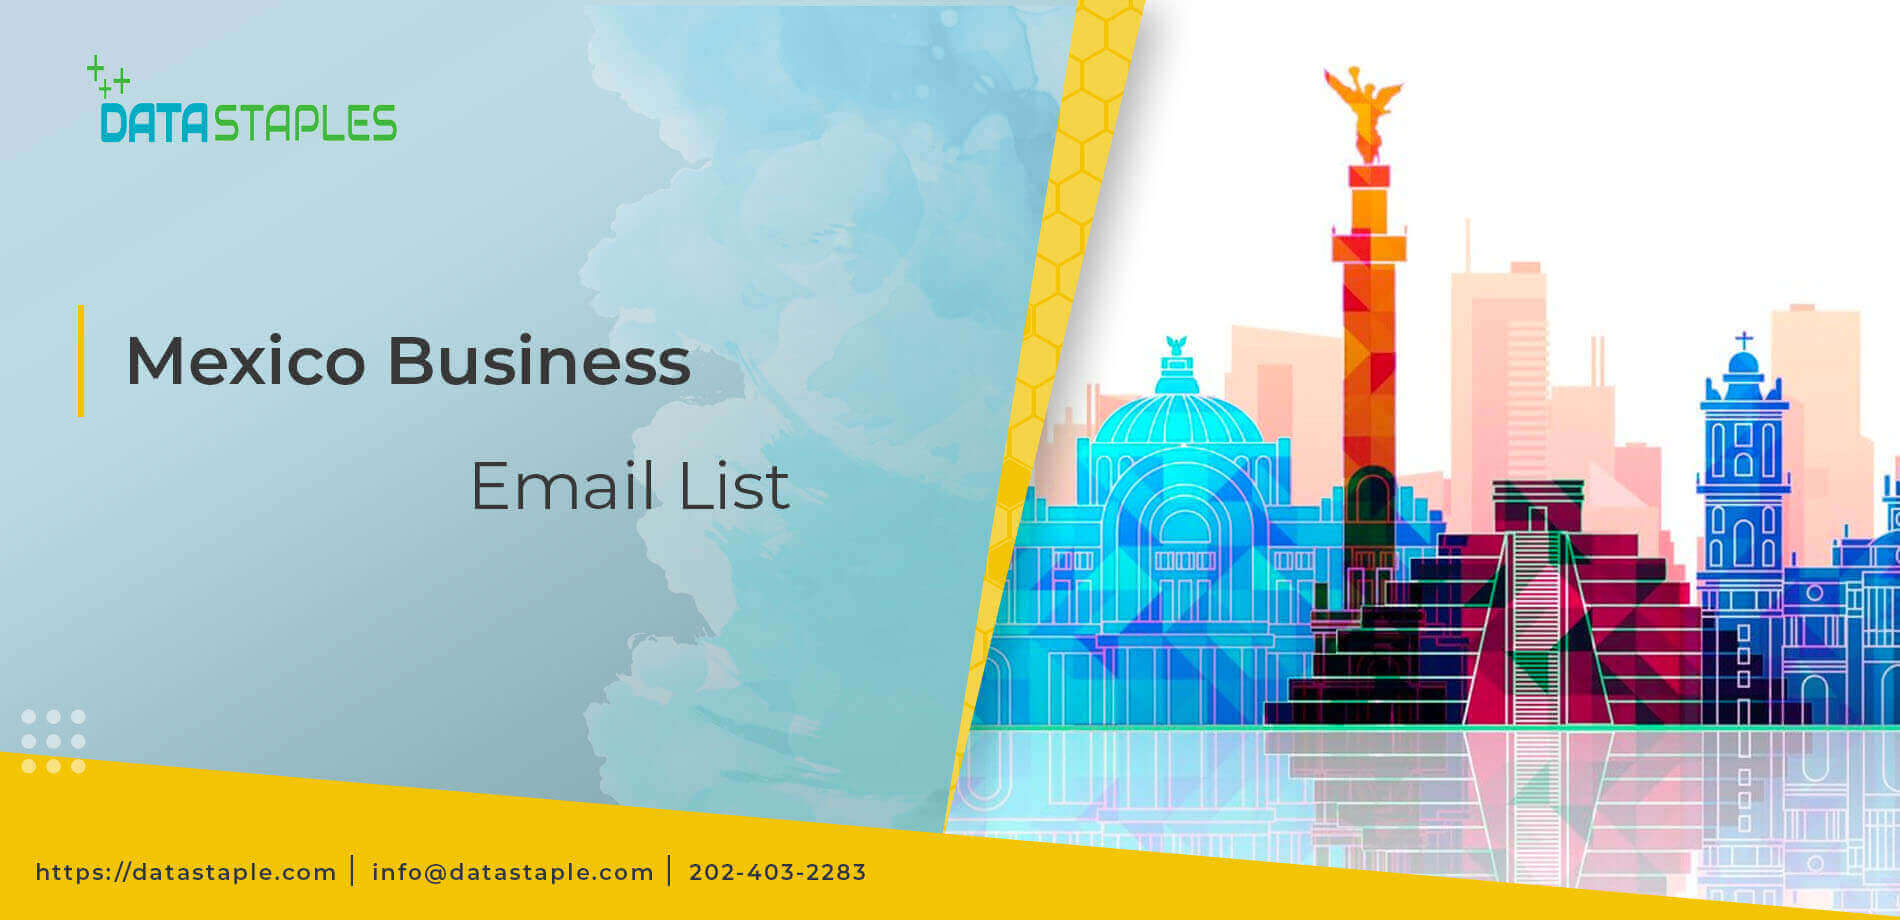 Mexico Business Email List | DataStaples